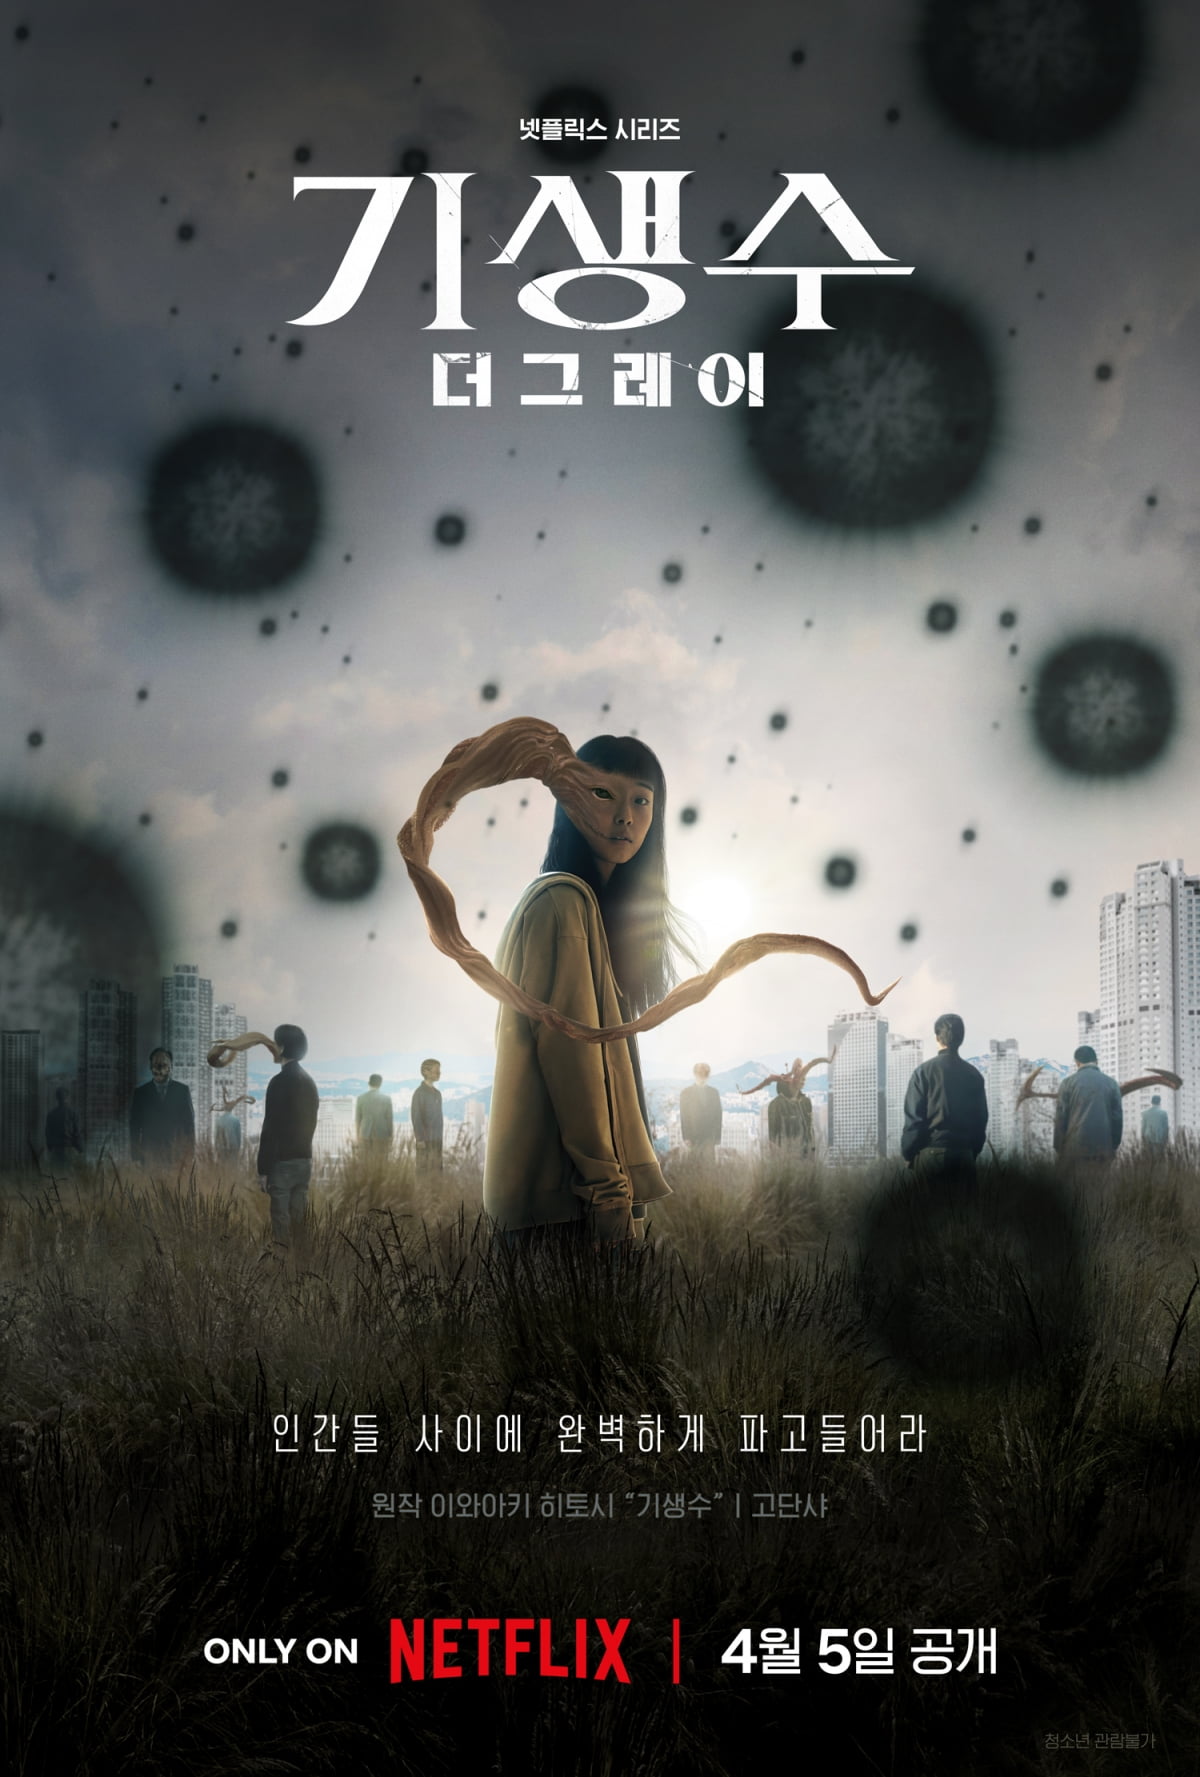 Director Yeon Sang-ho's 'Parasite: The Gray', expansion of new creatures